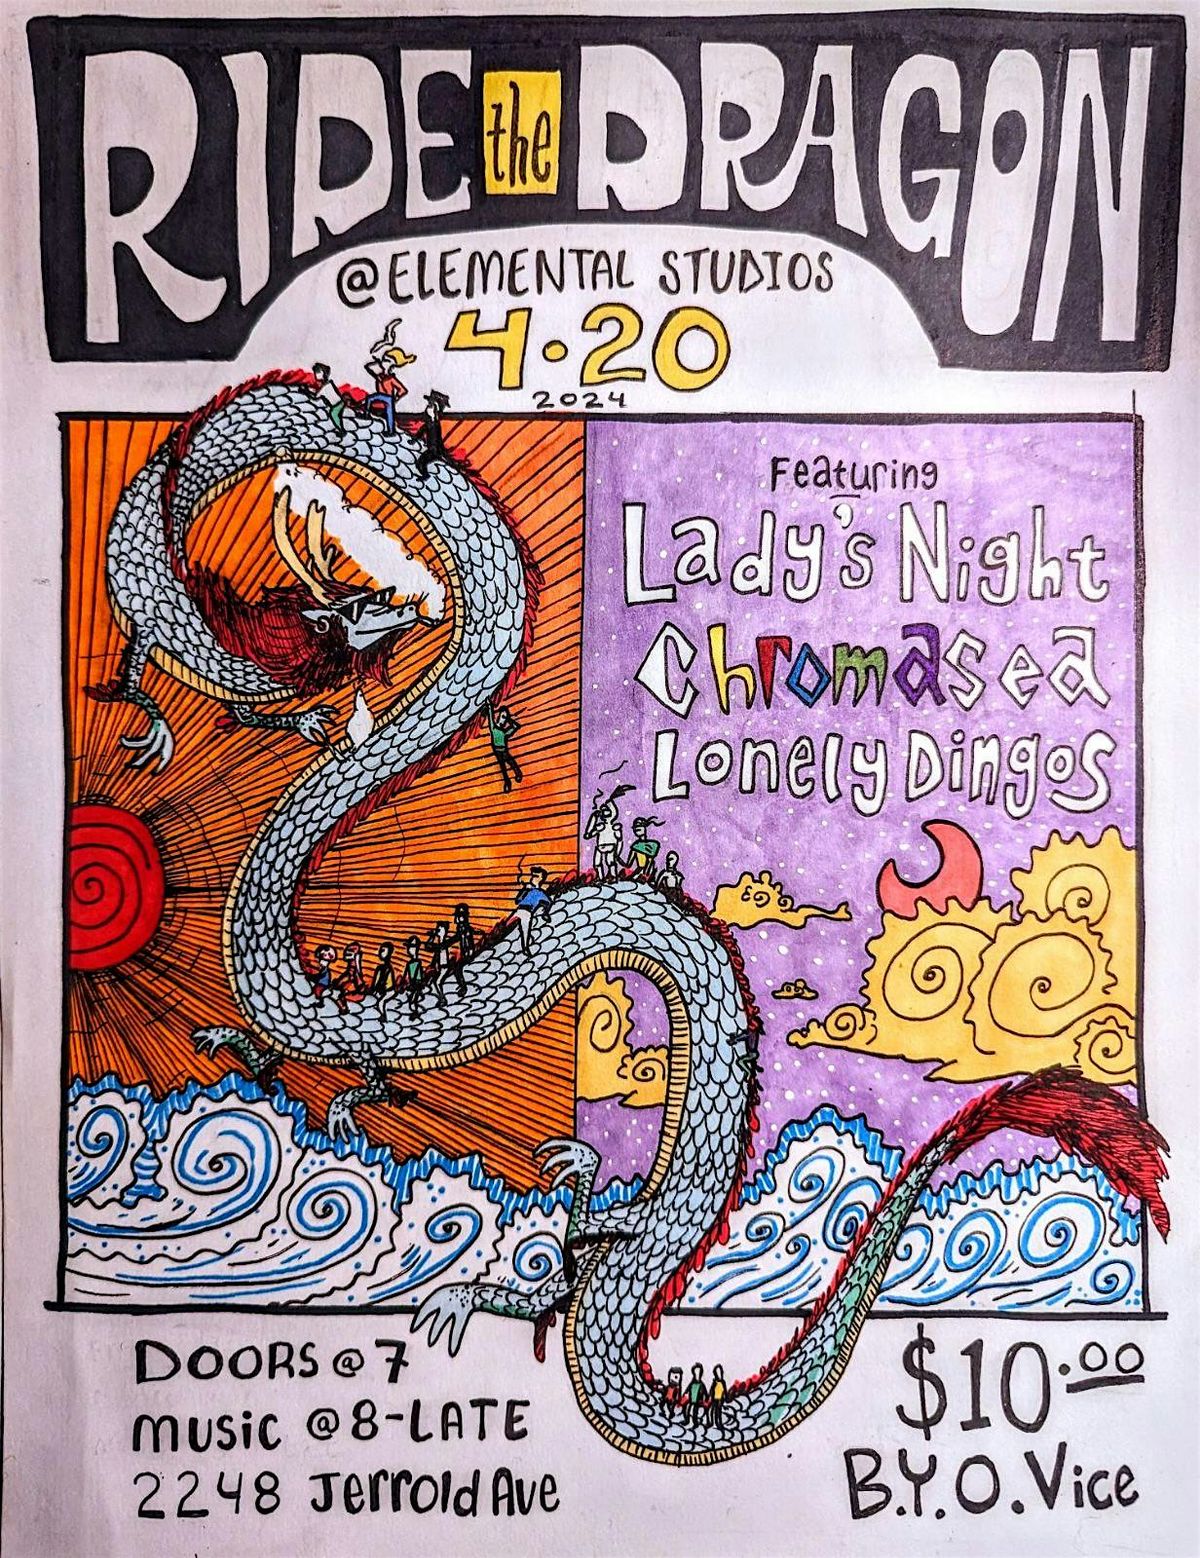 Ride the Dragon Music and art event